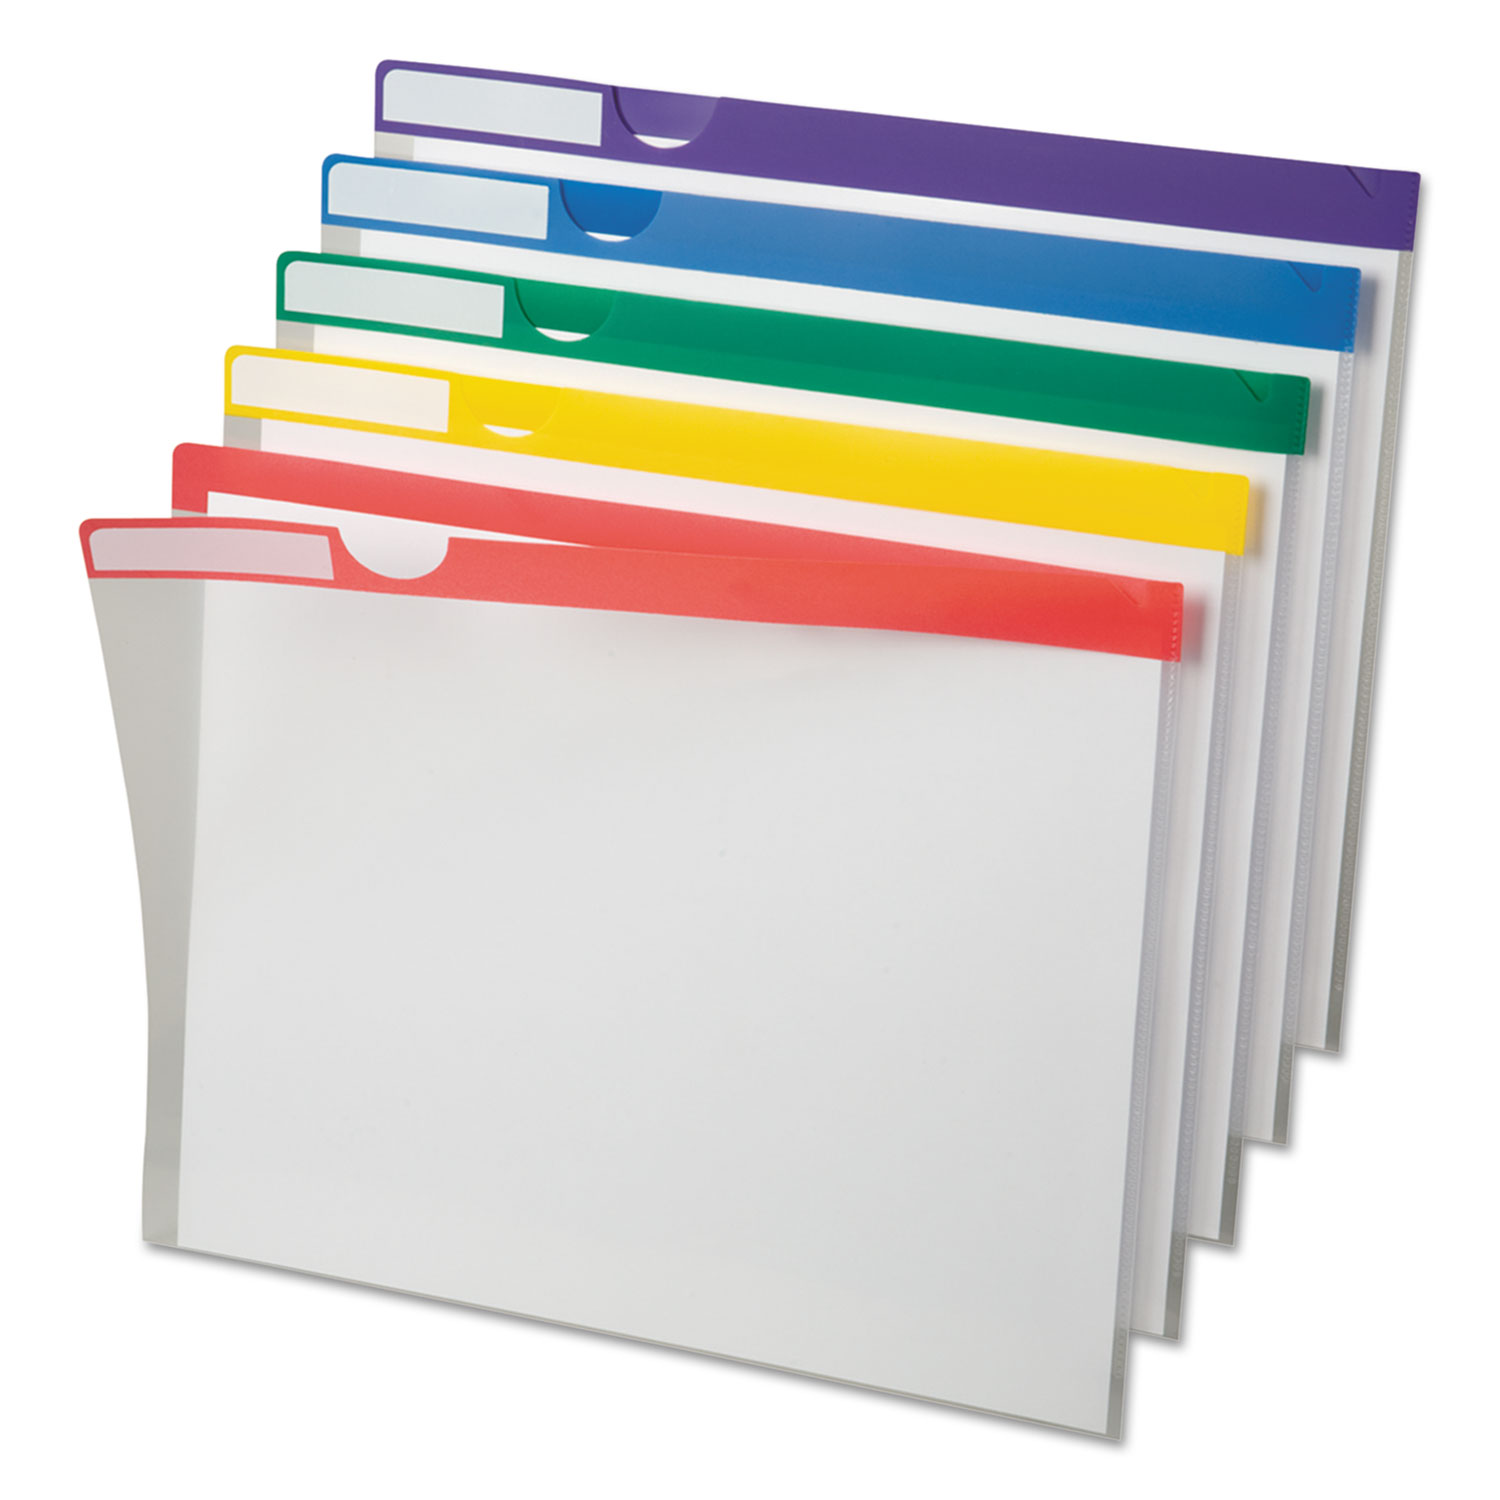 Clear Poly Index Folders, Letter Size, Assorted Colors, 10/Pack